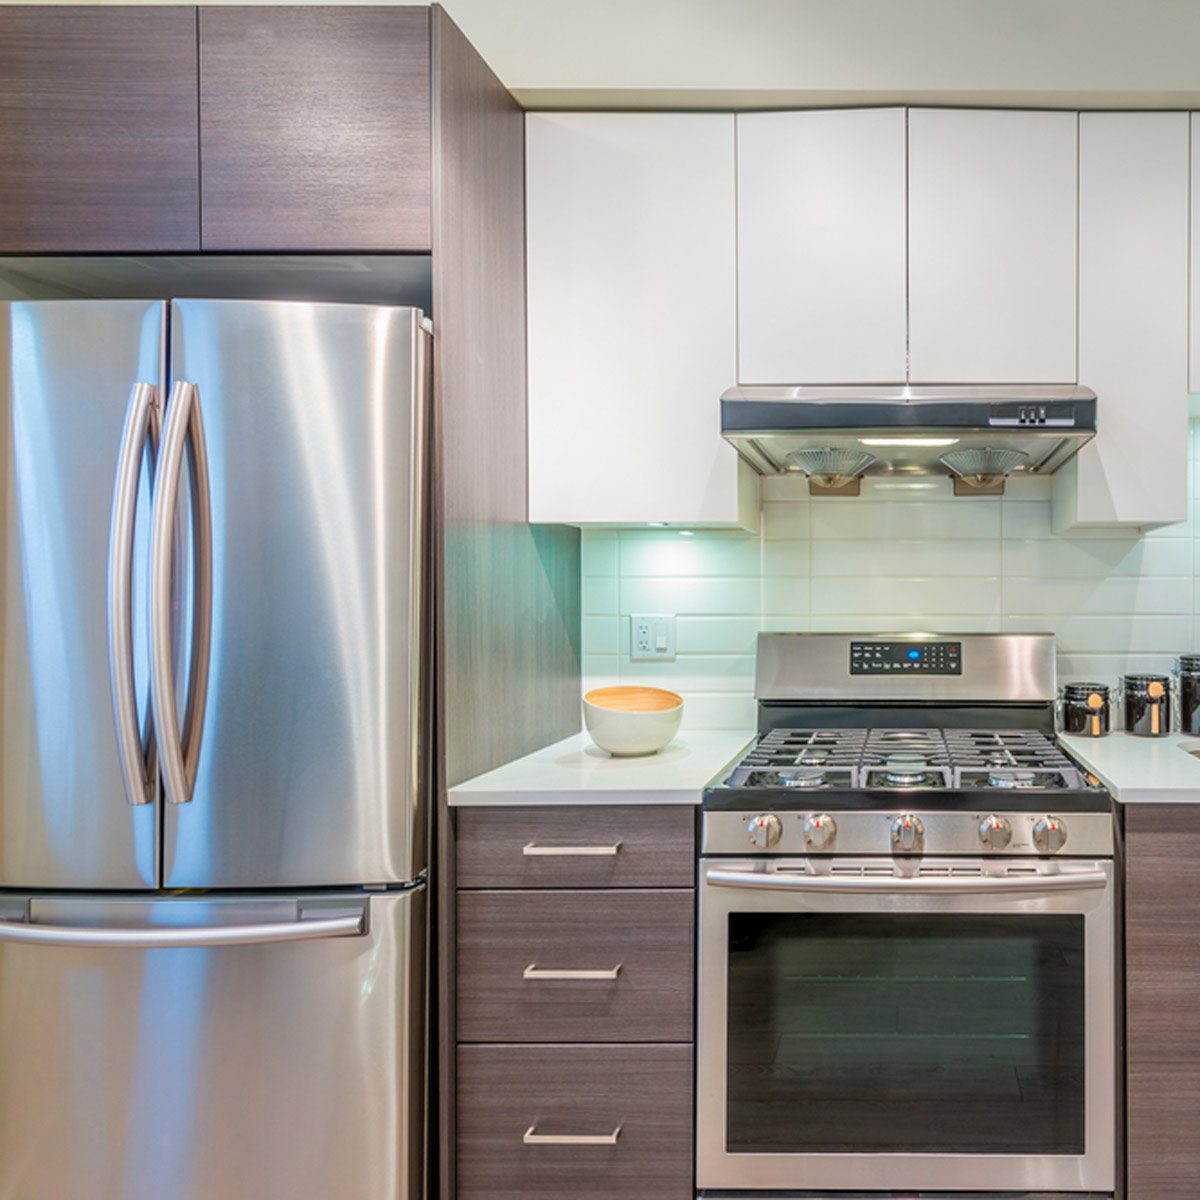 stainless steel appliances and fridge